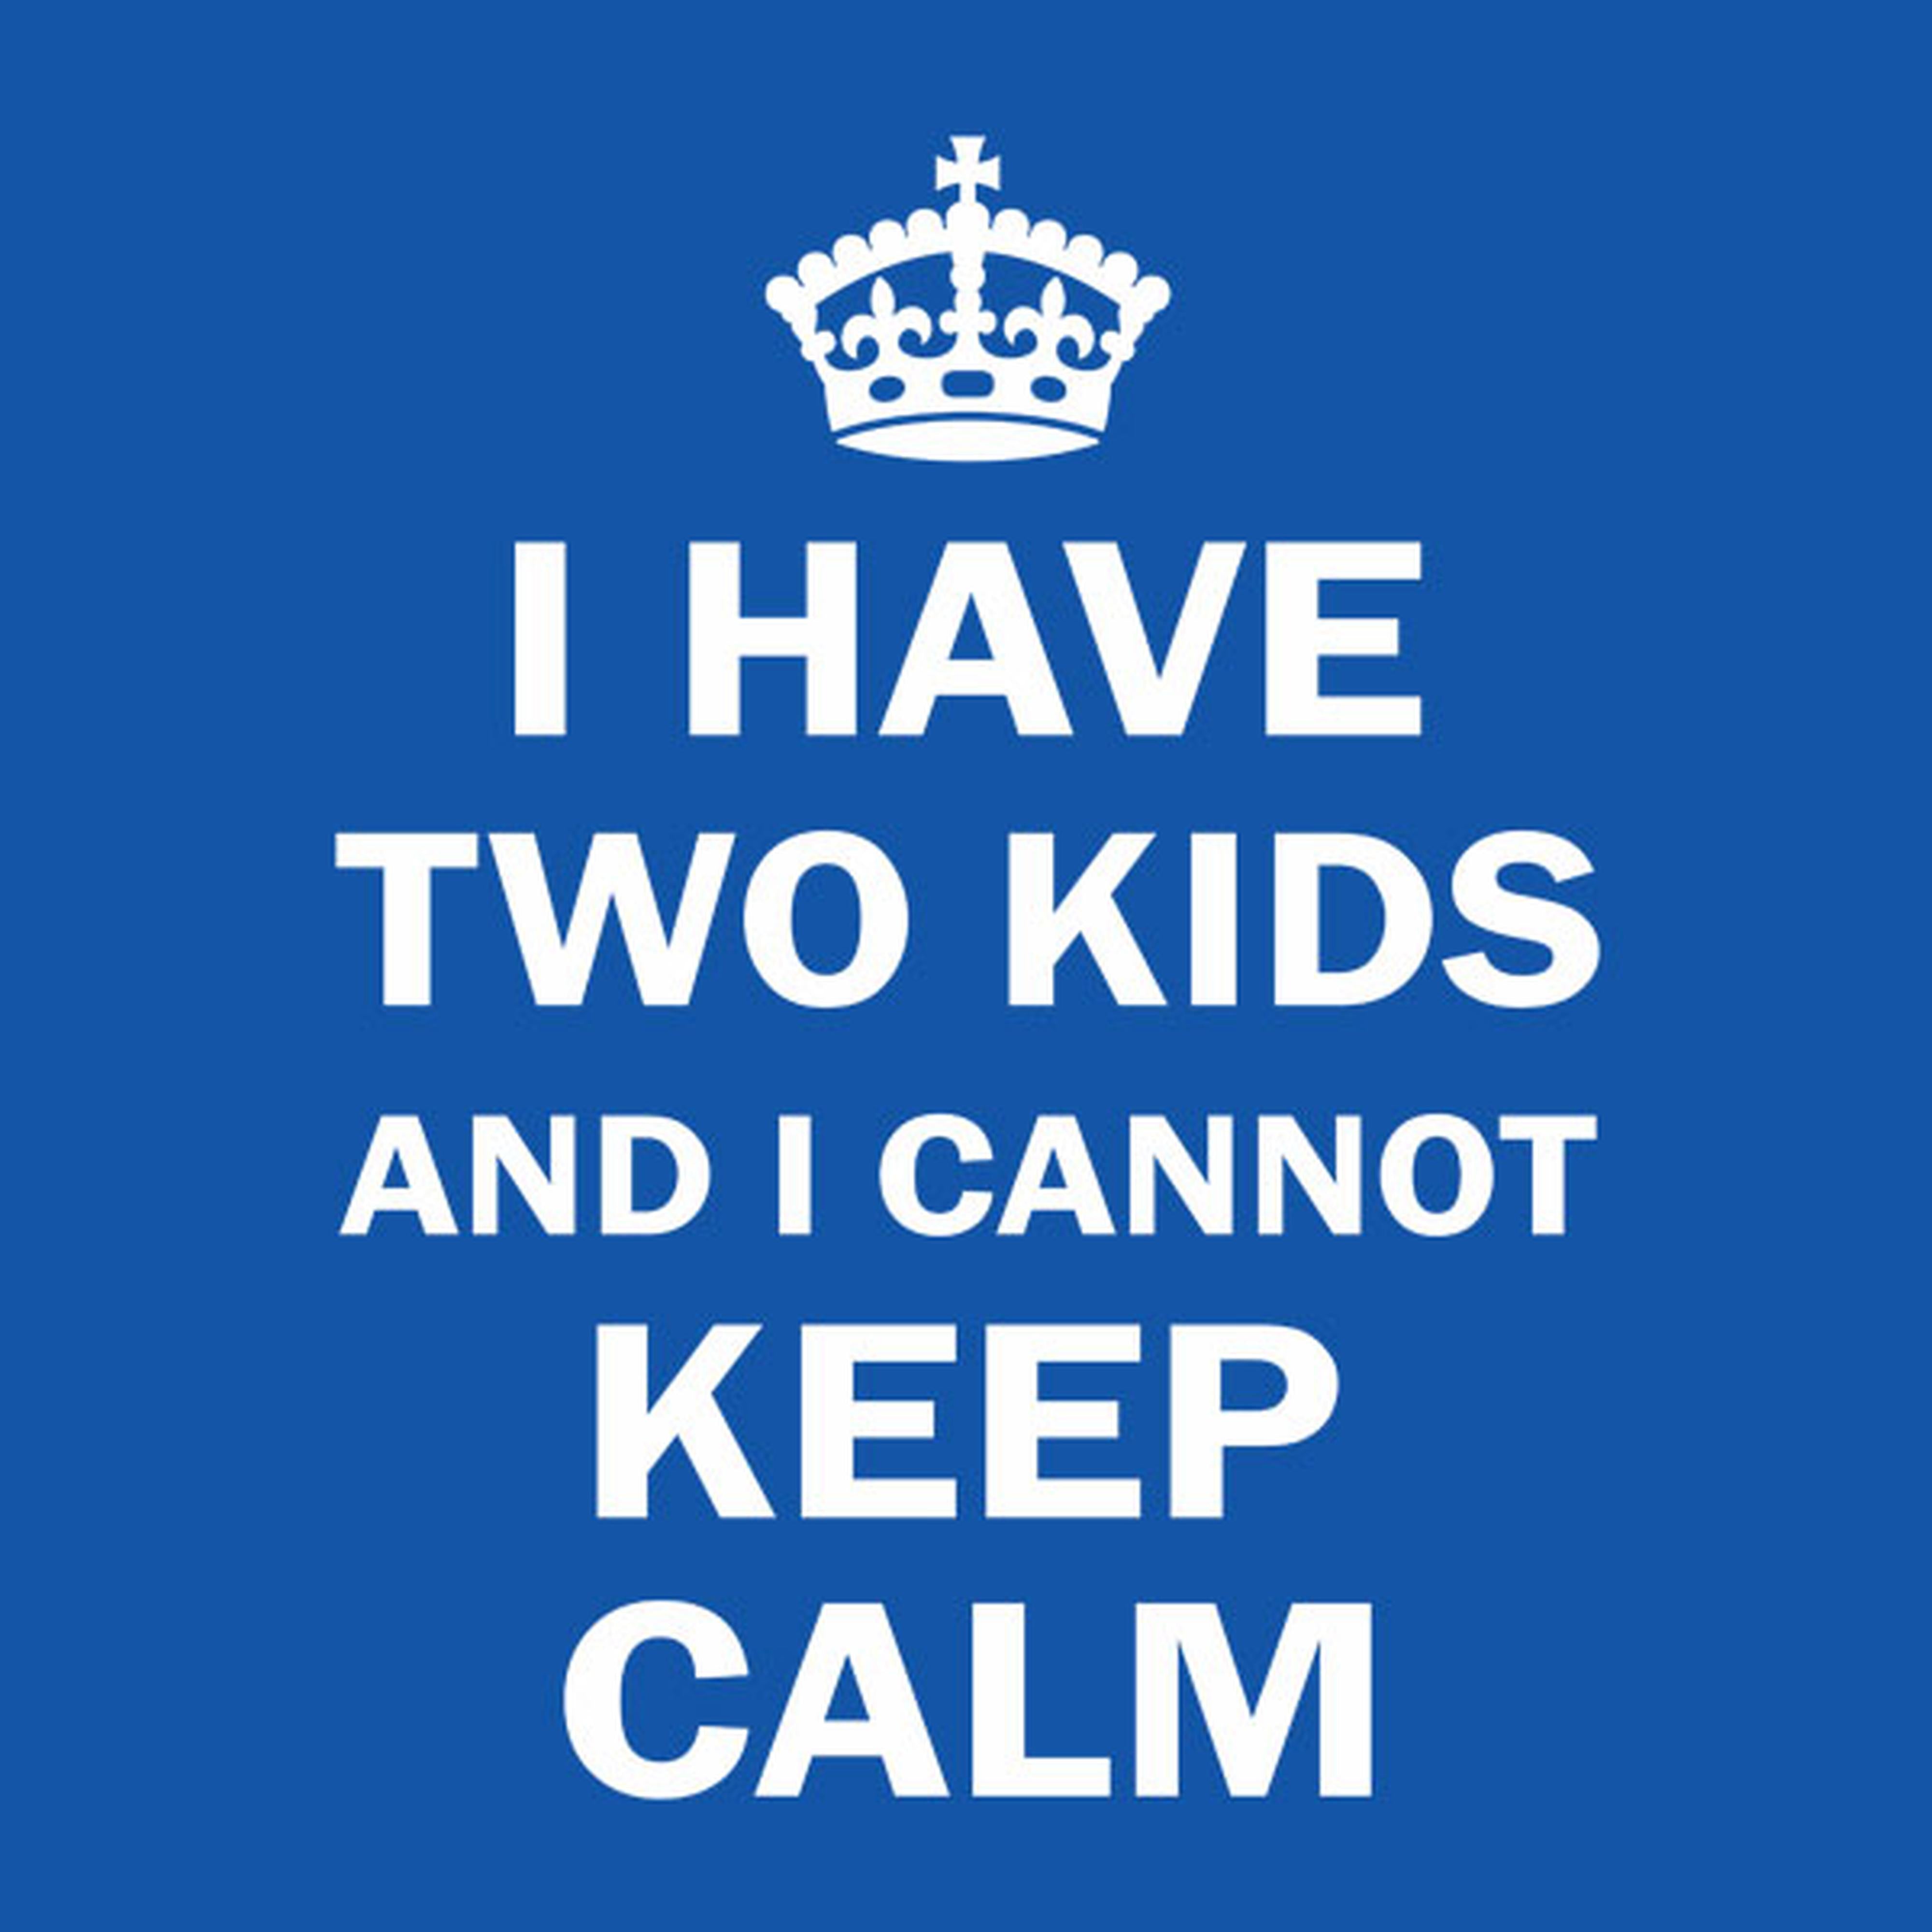 I have 2 kids and I cannot keep calm - T-shirt